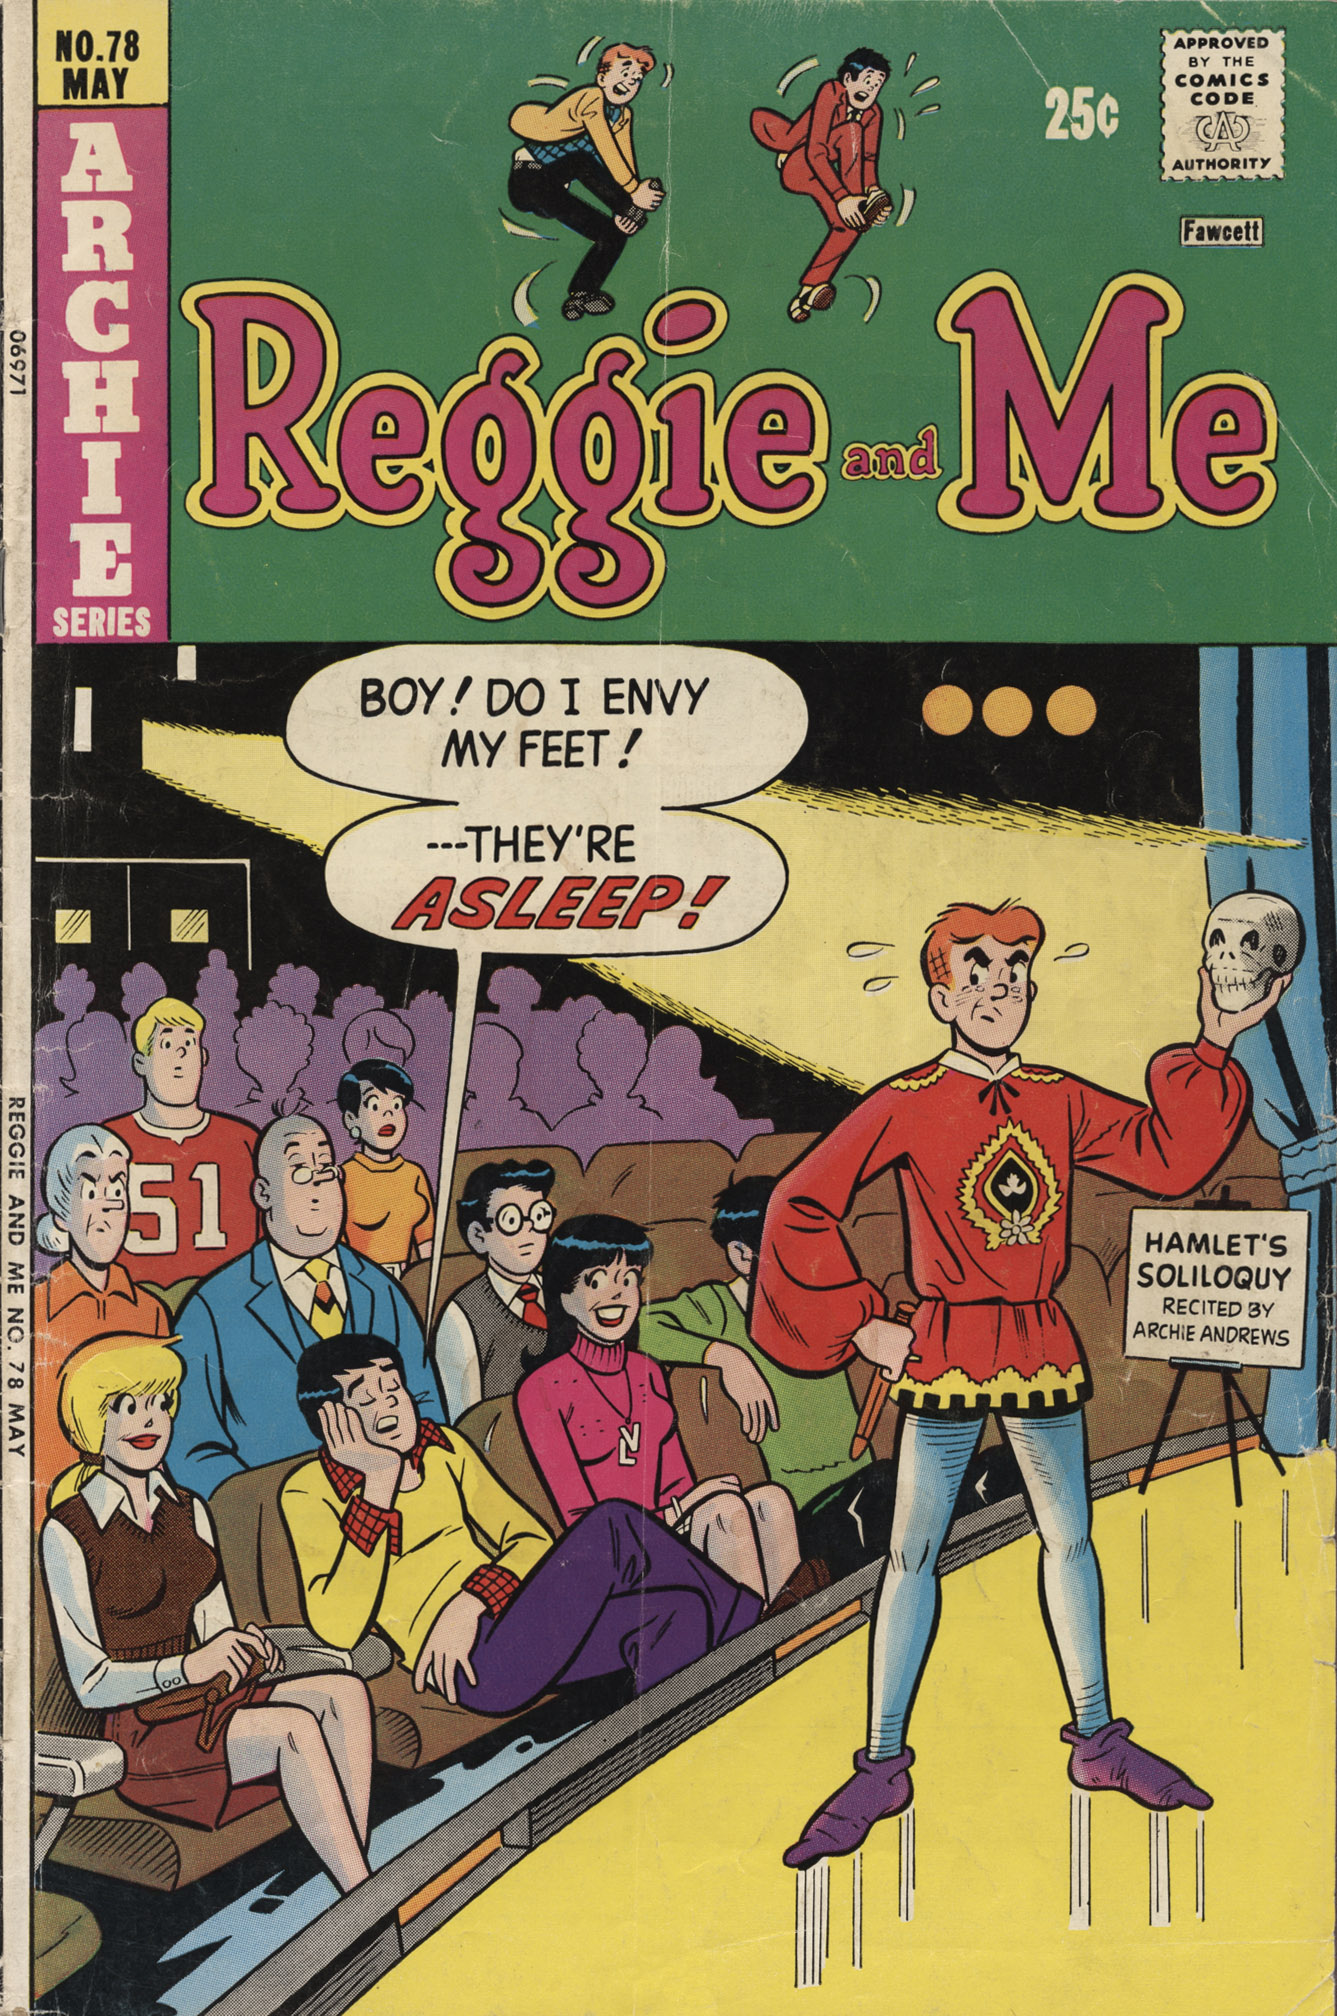 Read online Reggie and Me (1966) comic -  Issue #78 - 1